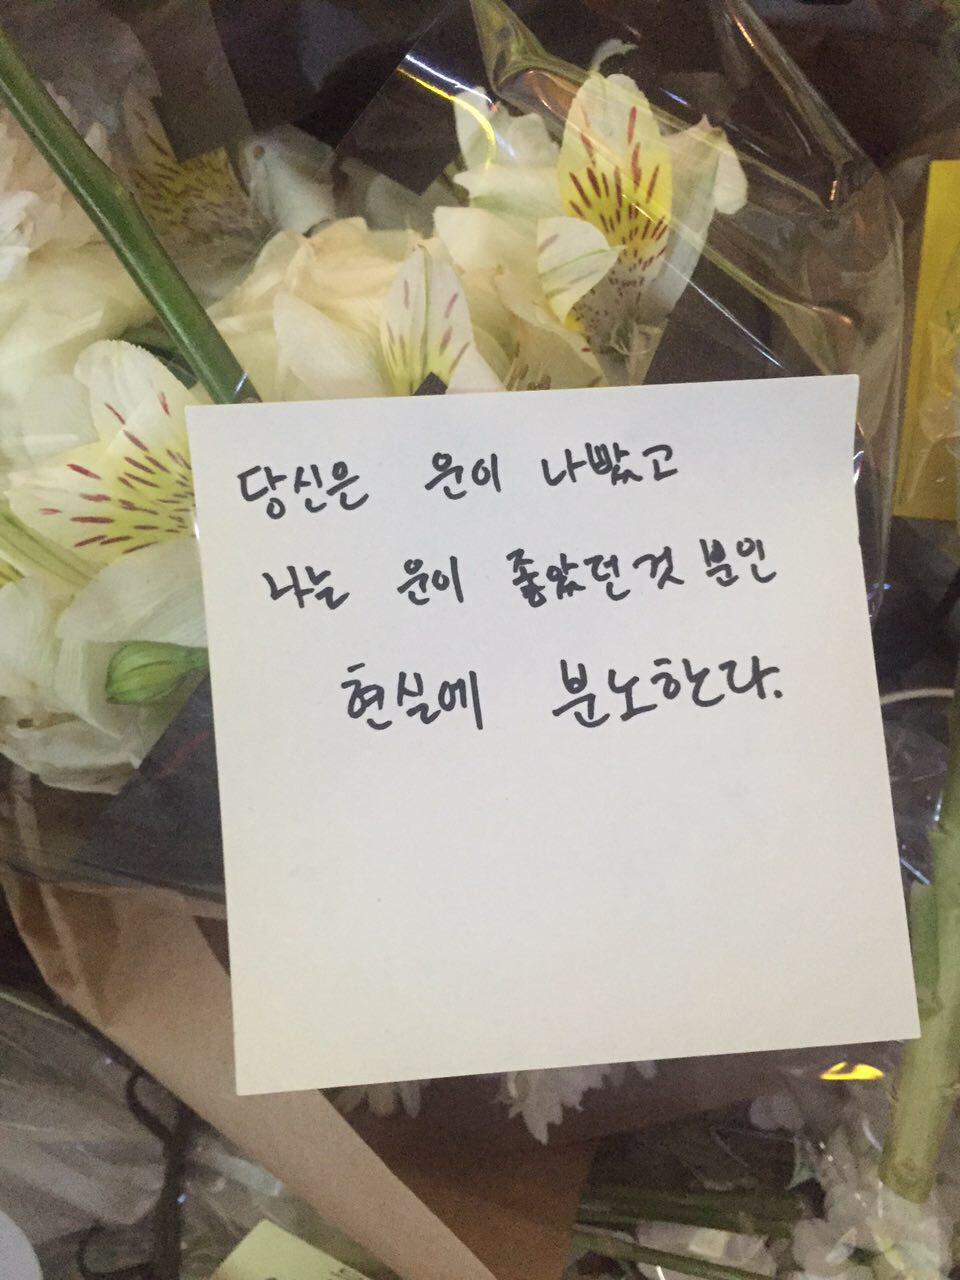 A post-it note to the Gangnam murder victim